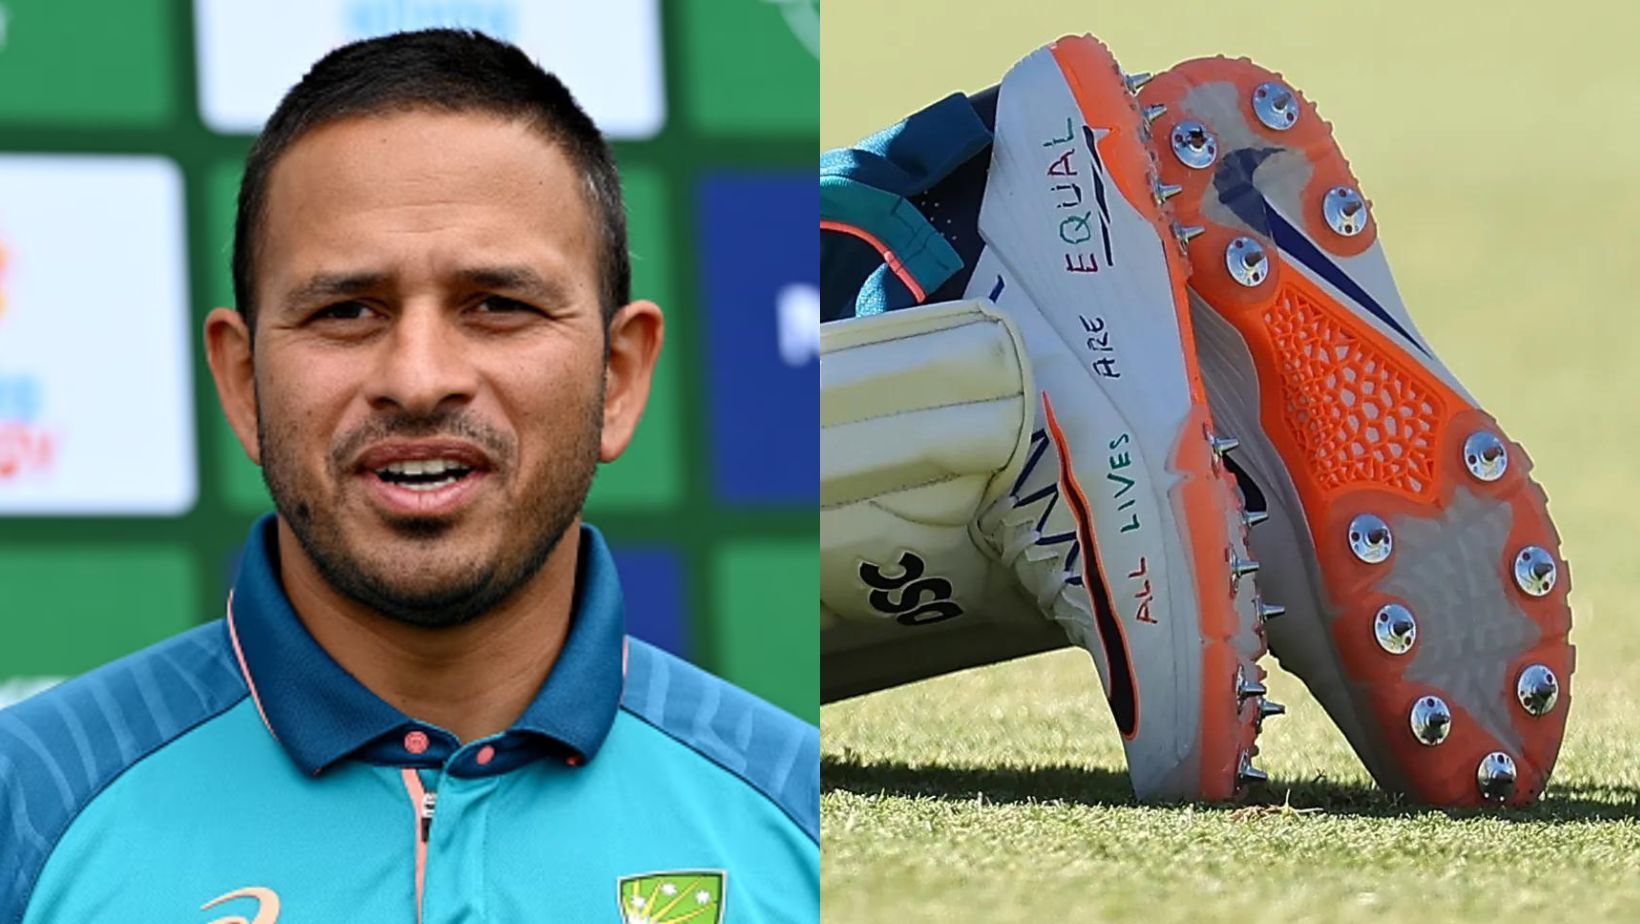 Usman Khawaja (L) and his shoes with slogans.